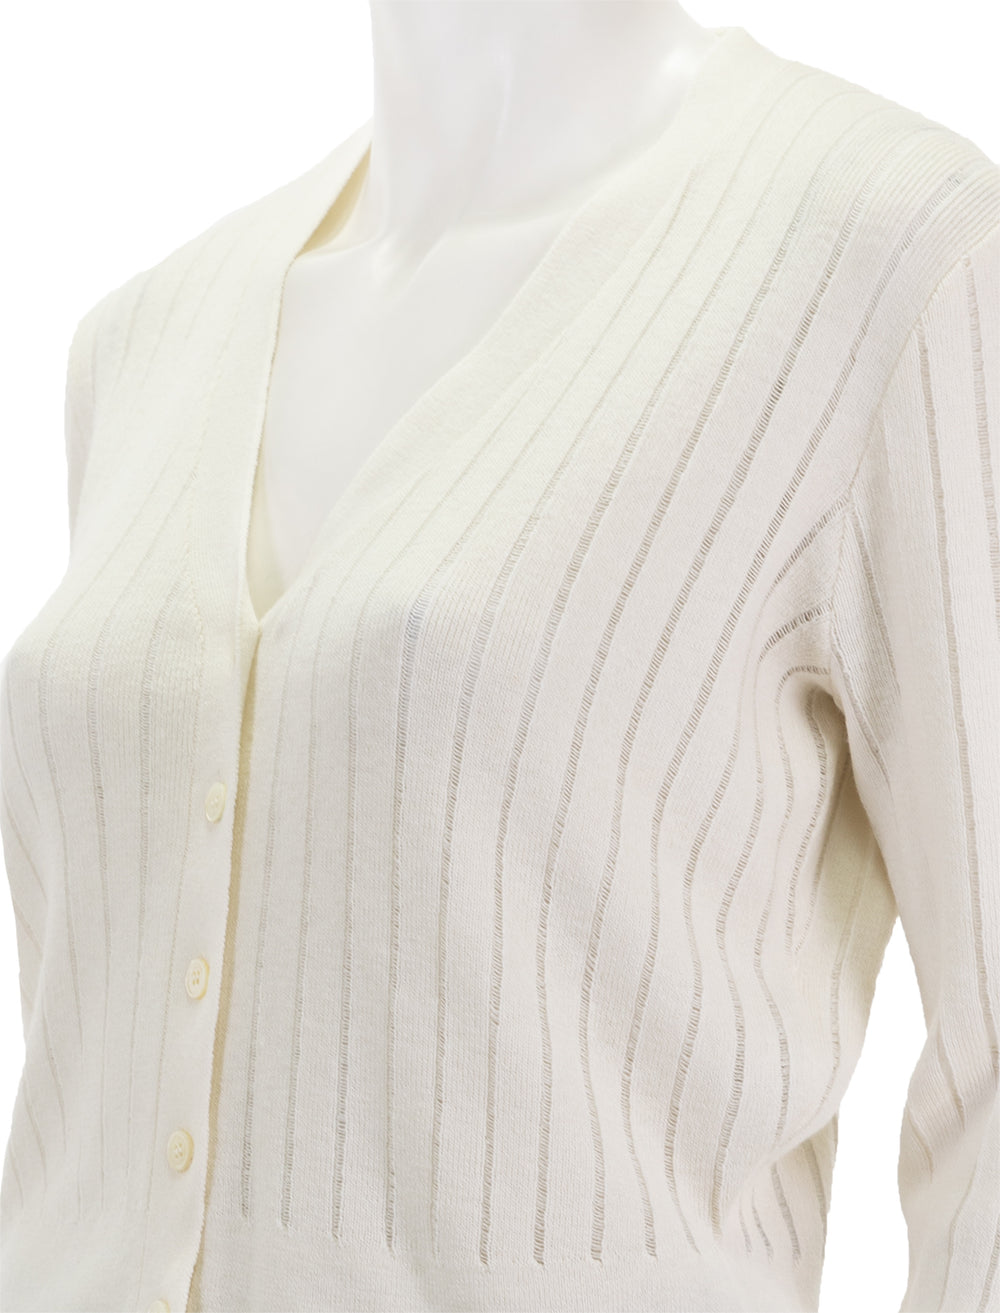 Close-up view of Anine Bing's hazel cardigan in ivory.